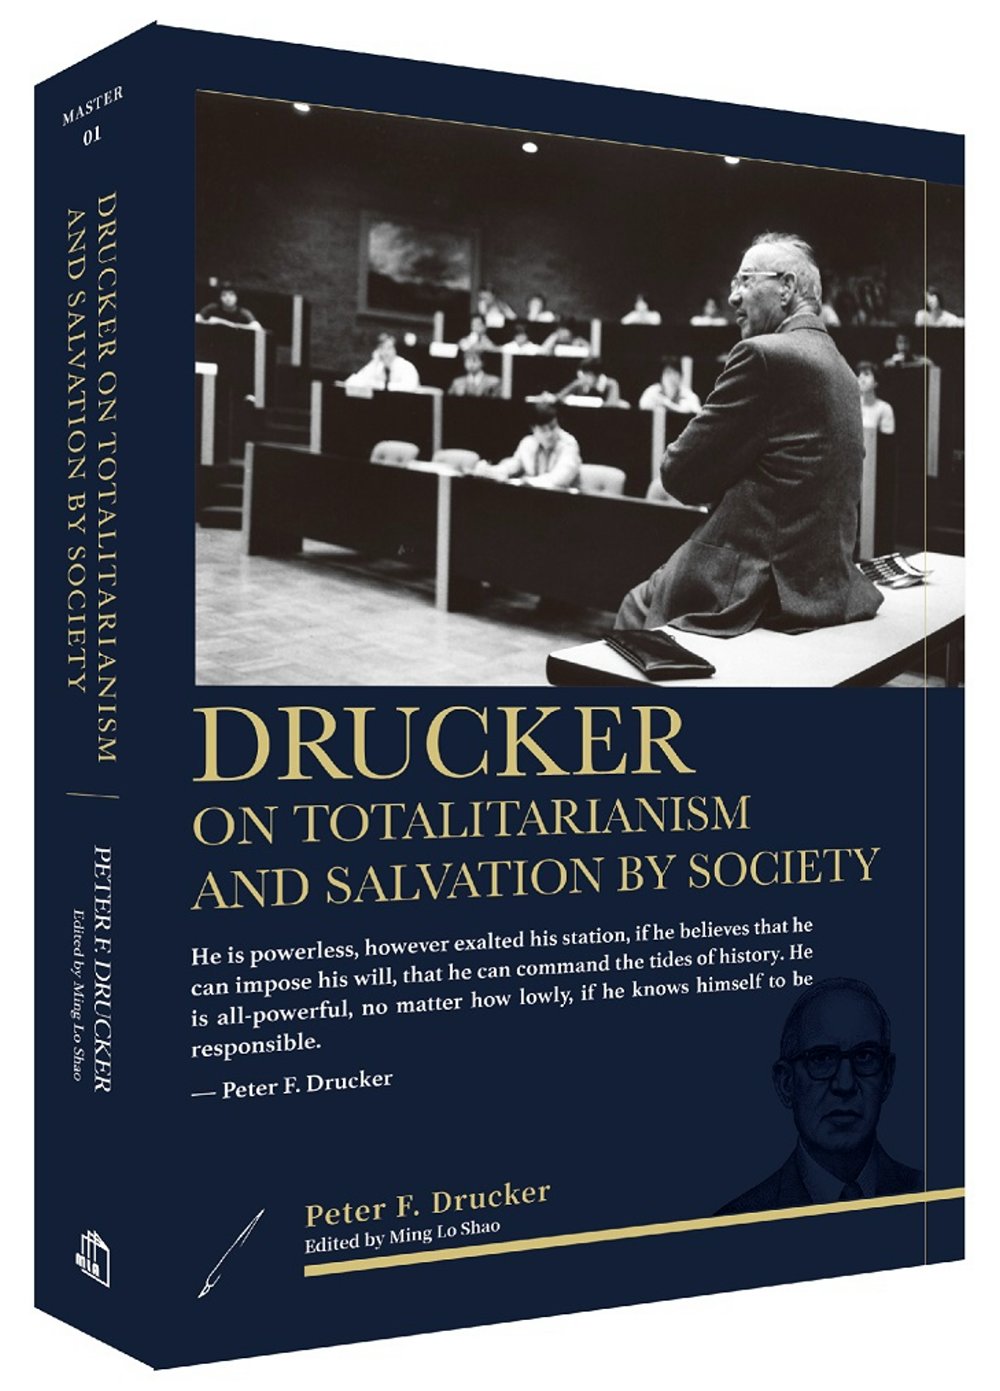 Drucker on Totalitarianism and Salvation by Society